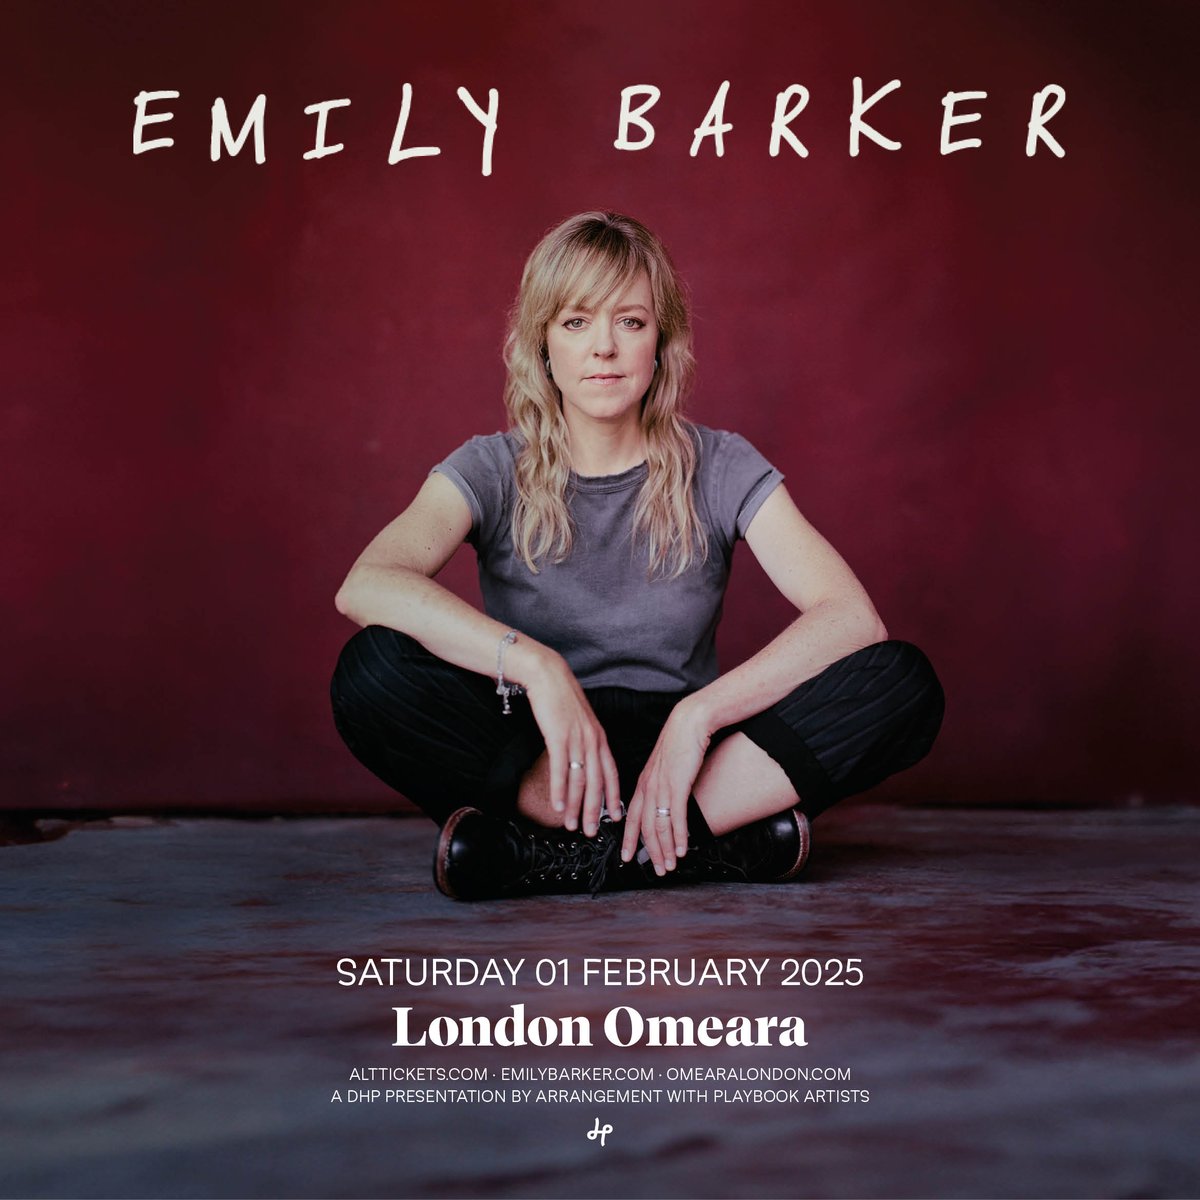 With her new album, 'Fragile as Humans', coming out tomorrow, @emilybarkerhalo has announced a show at @omearalondon on 1st February! Tickets go on sale tomorrow at 10am, set a reminder now: bit.ly/4bjGWVp